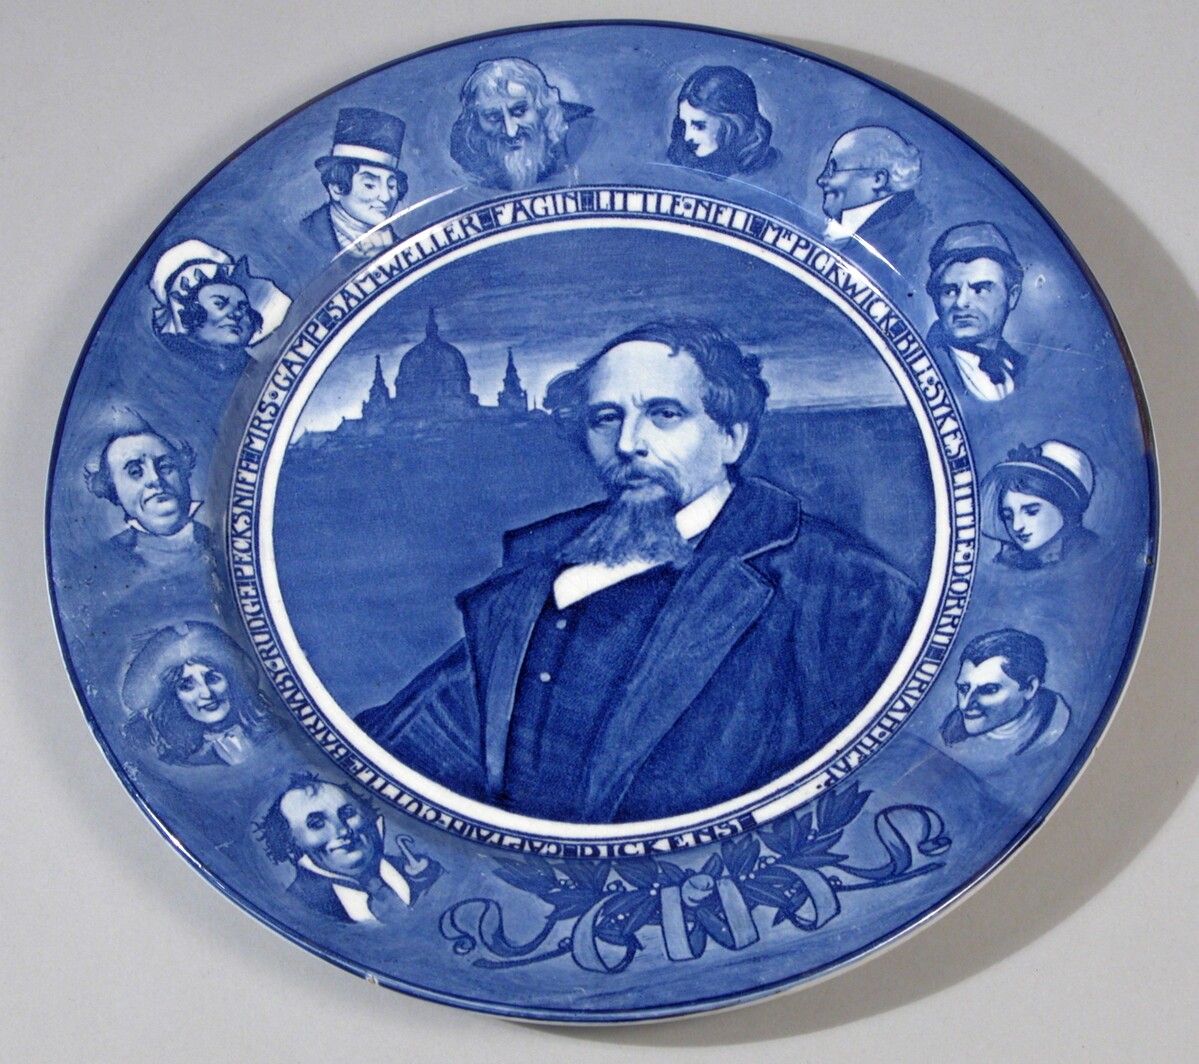 Plate printed in blue with a portrait of Charles Dickens, da323243